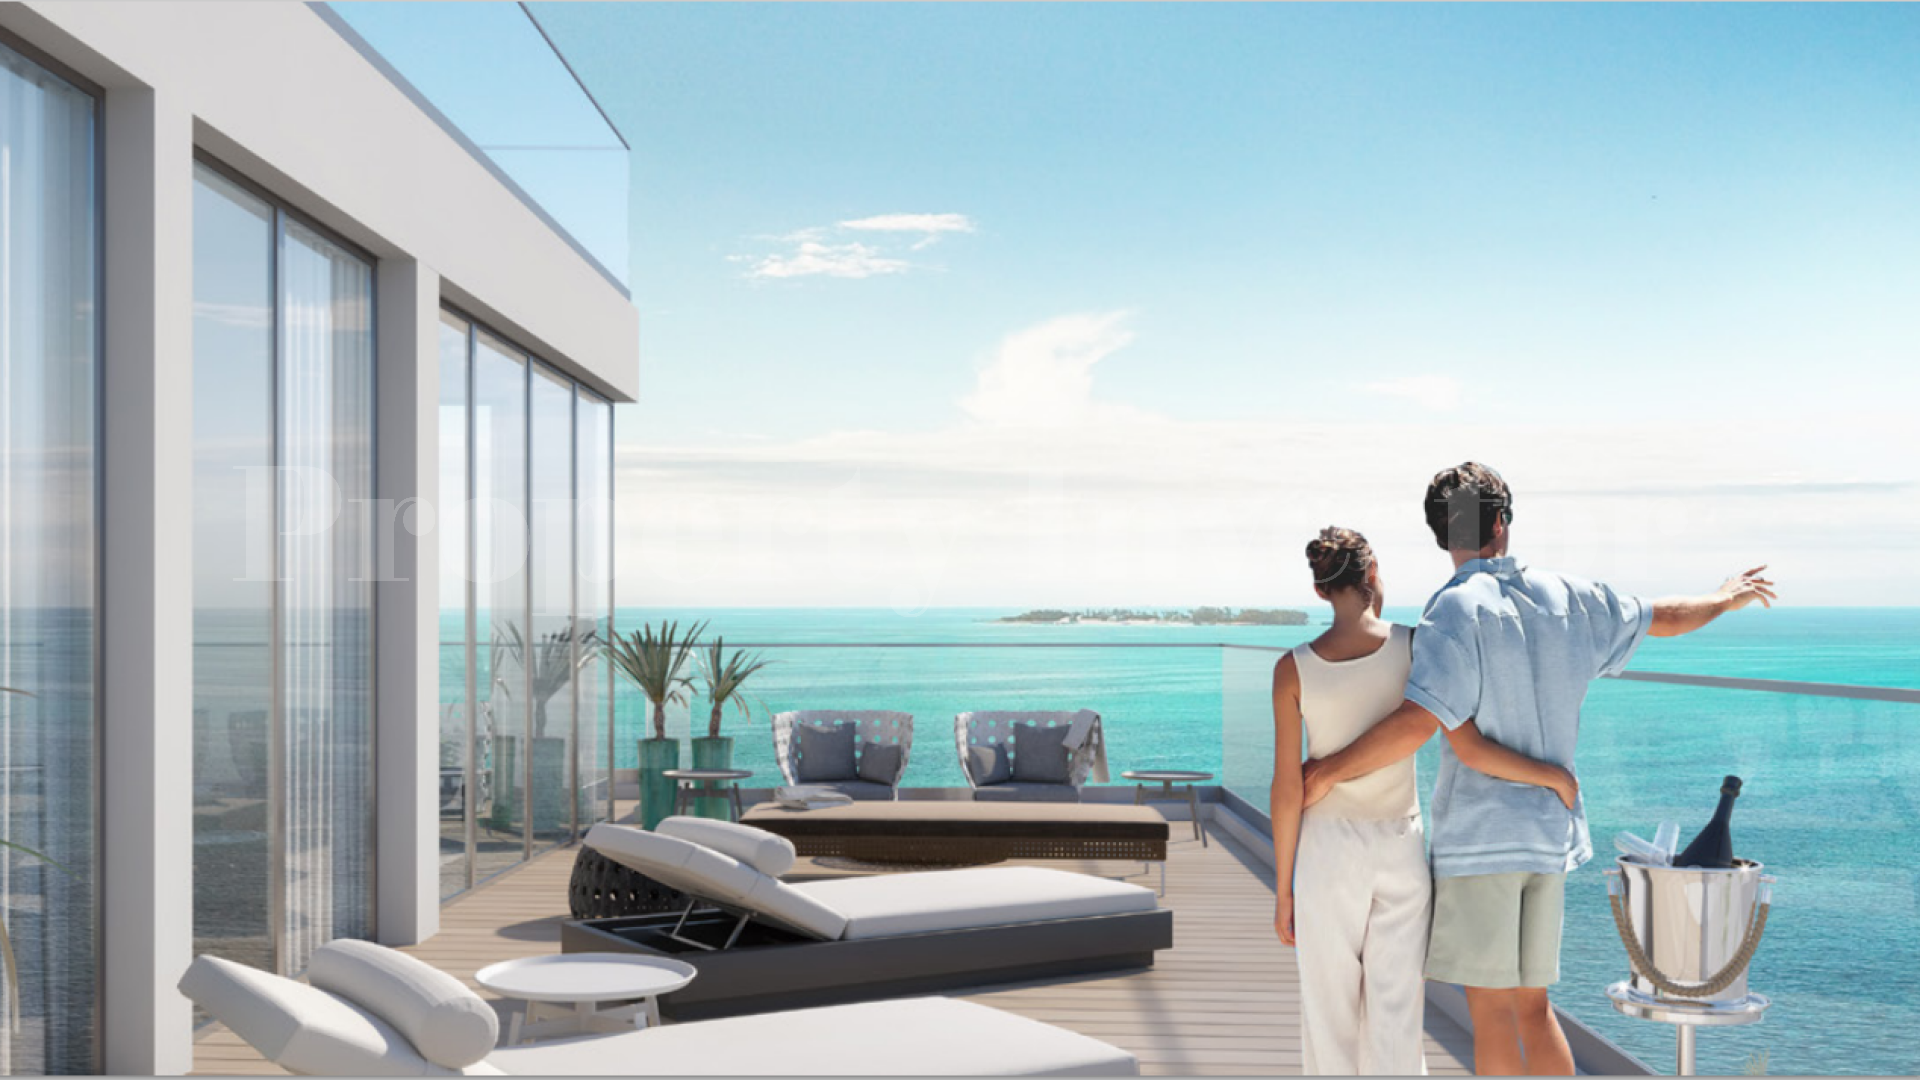 3 Bedroom Condo-Hotel Penthouse Residence in the Bahamas (Residence 606)